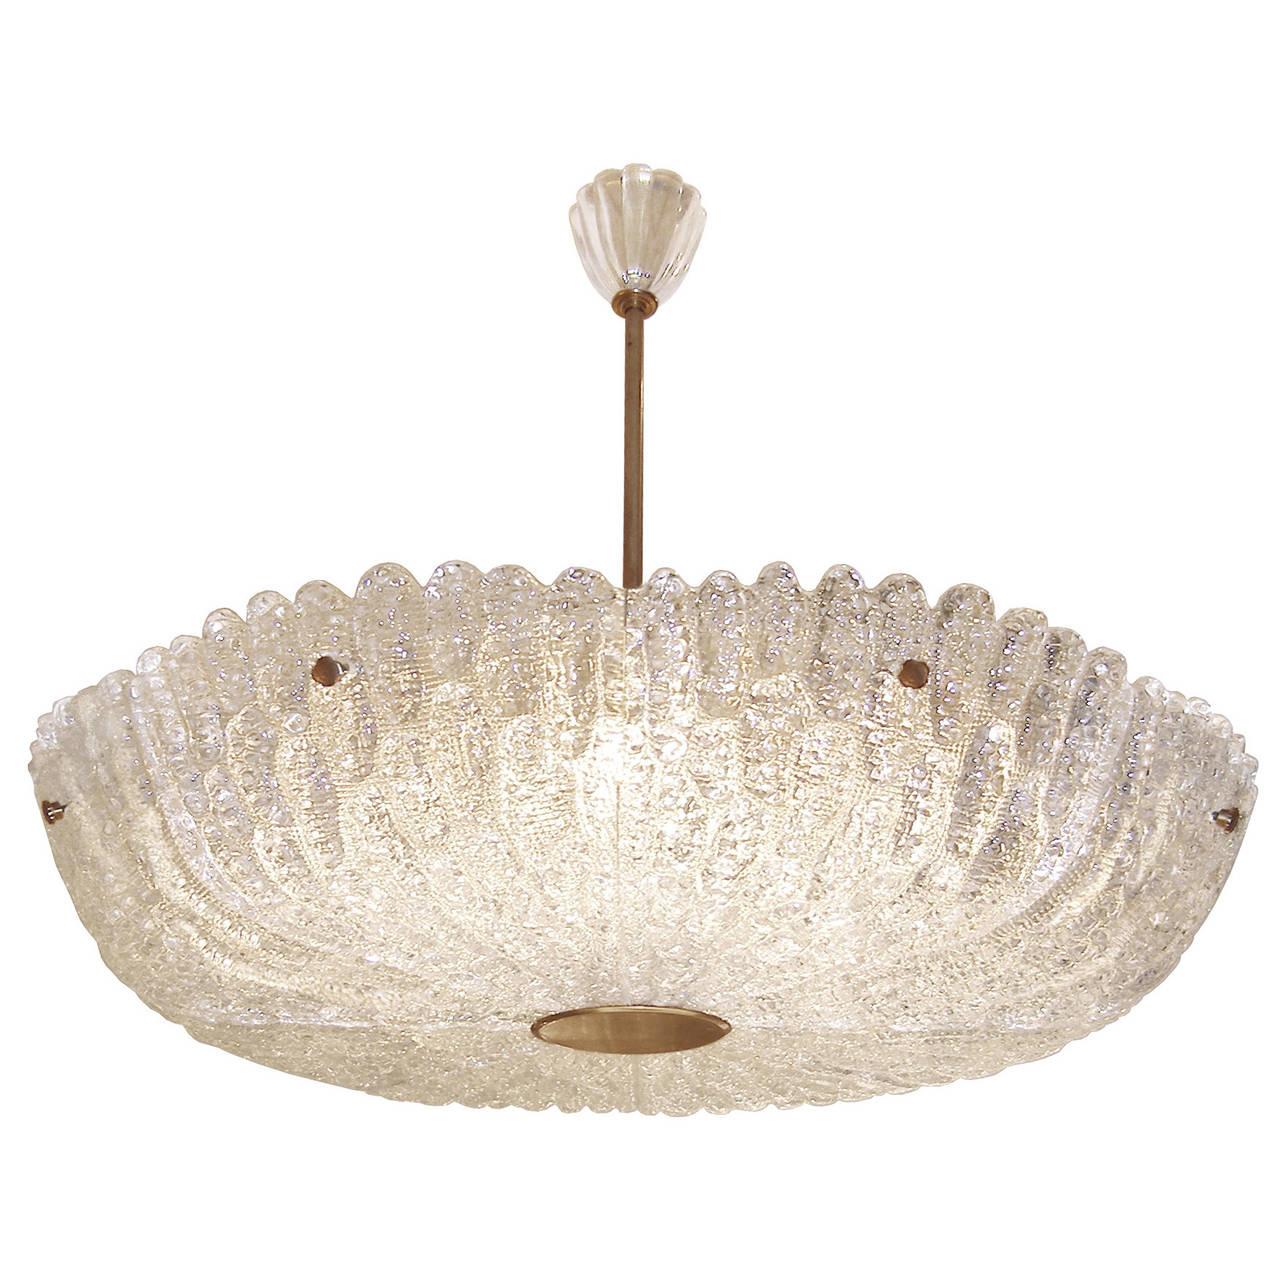 A chandelier consisting of multiple textured crystal panels hung on a brass frame by Orrefors.

Sweden, Circa 1940's